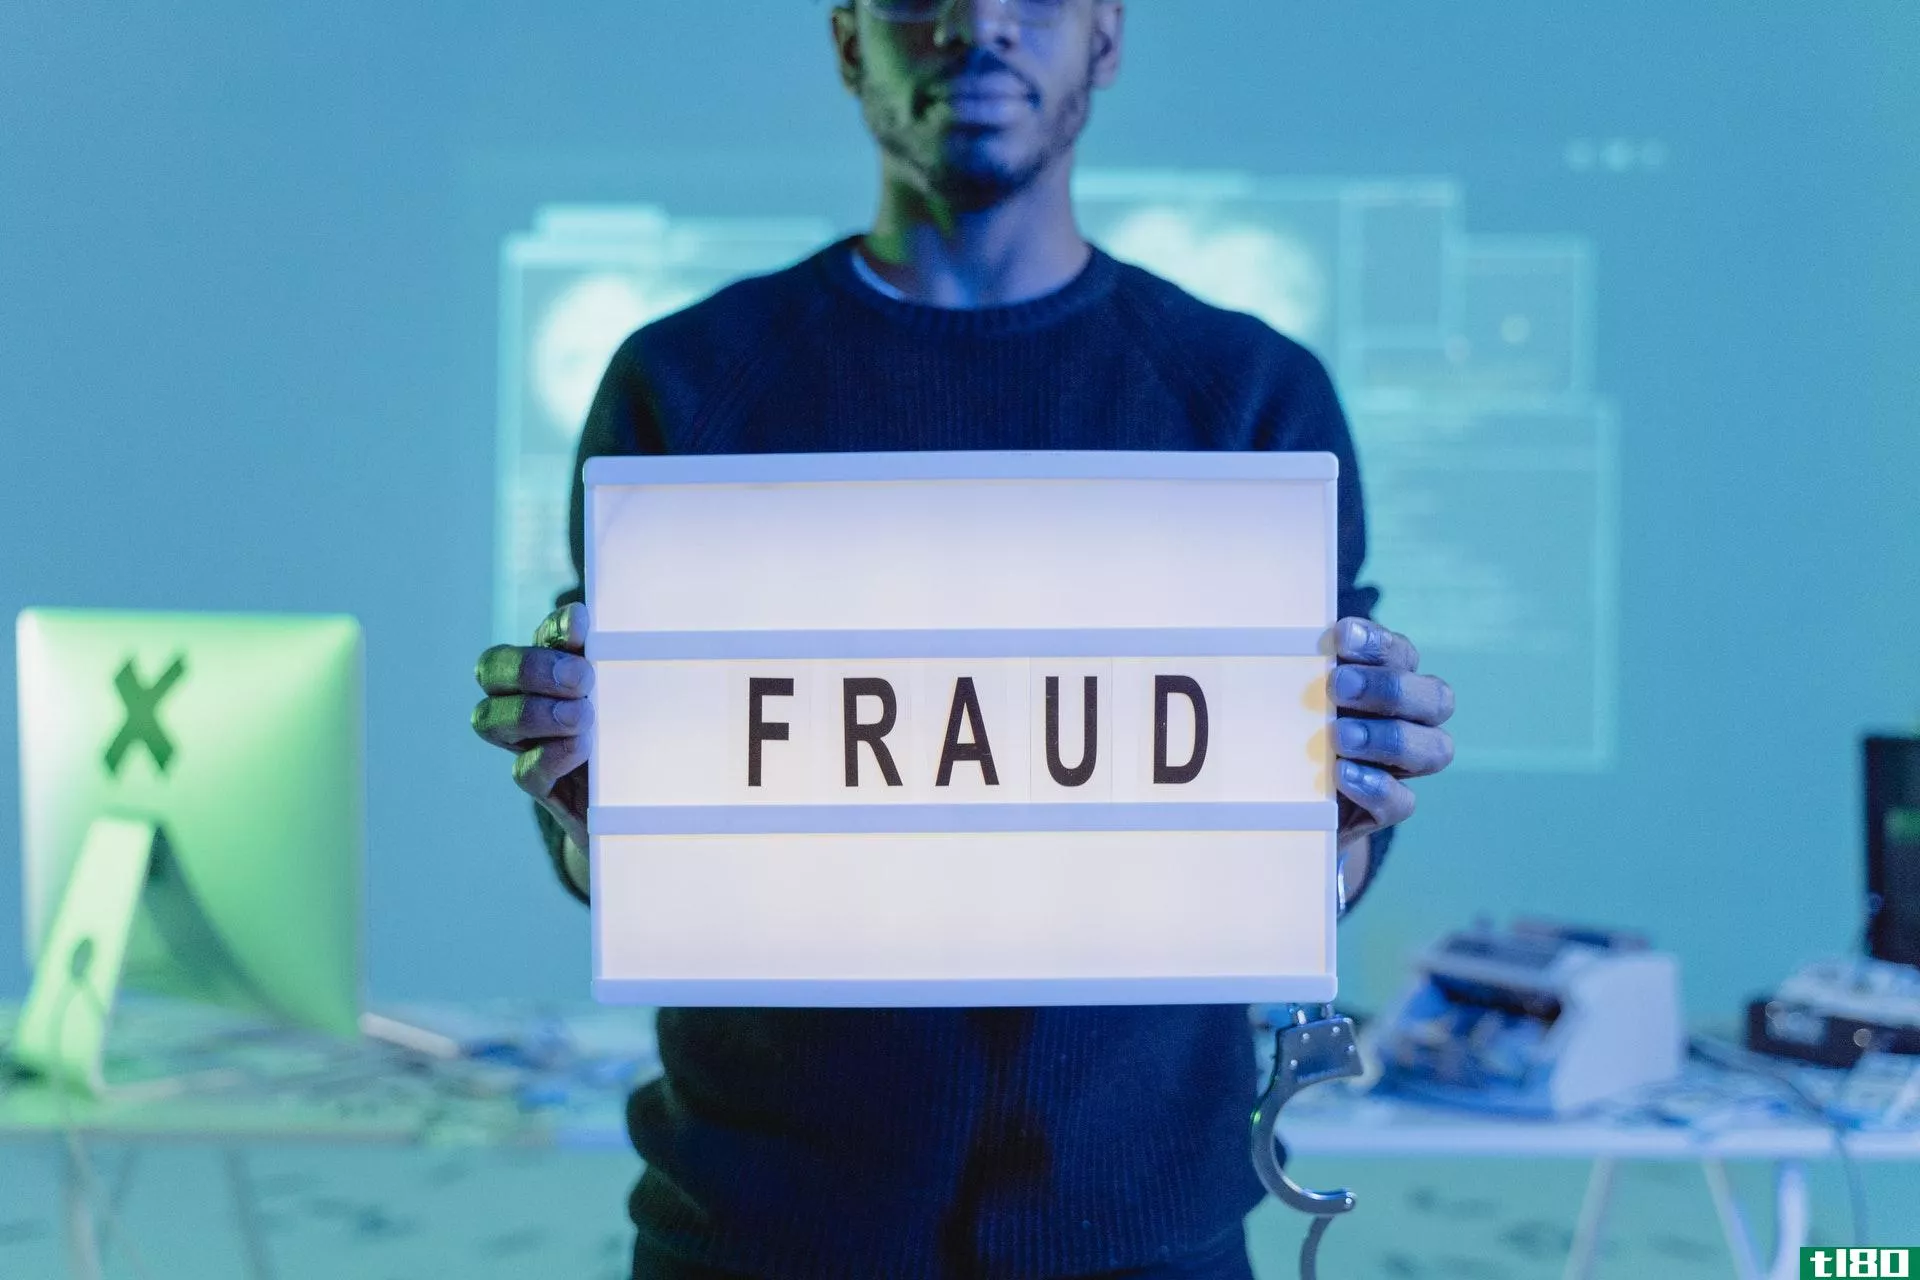 Man holding a laptop with fraud written on it